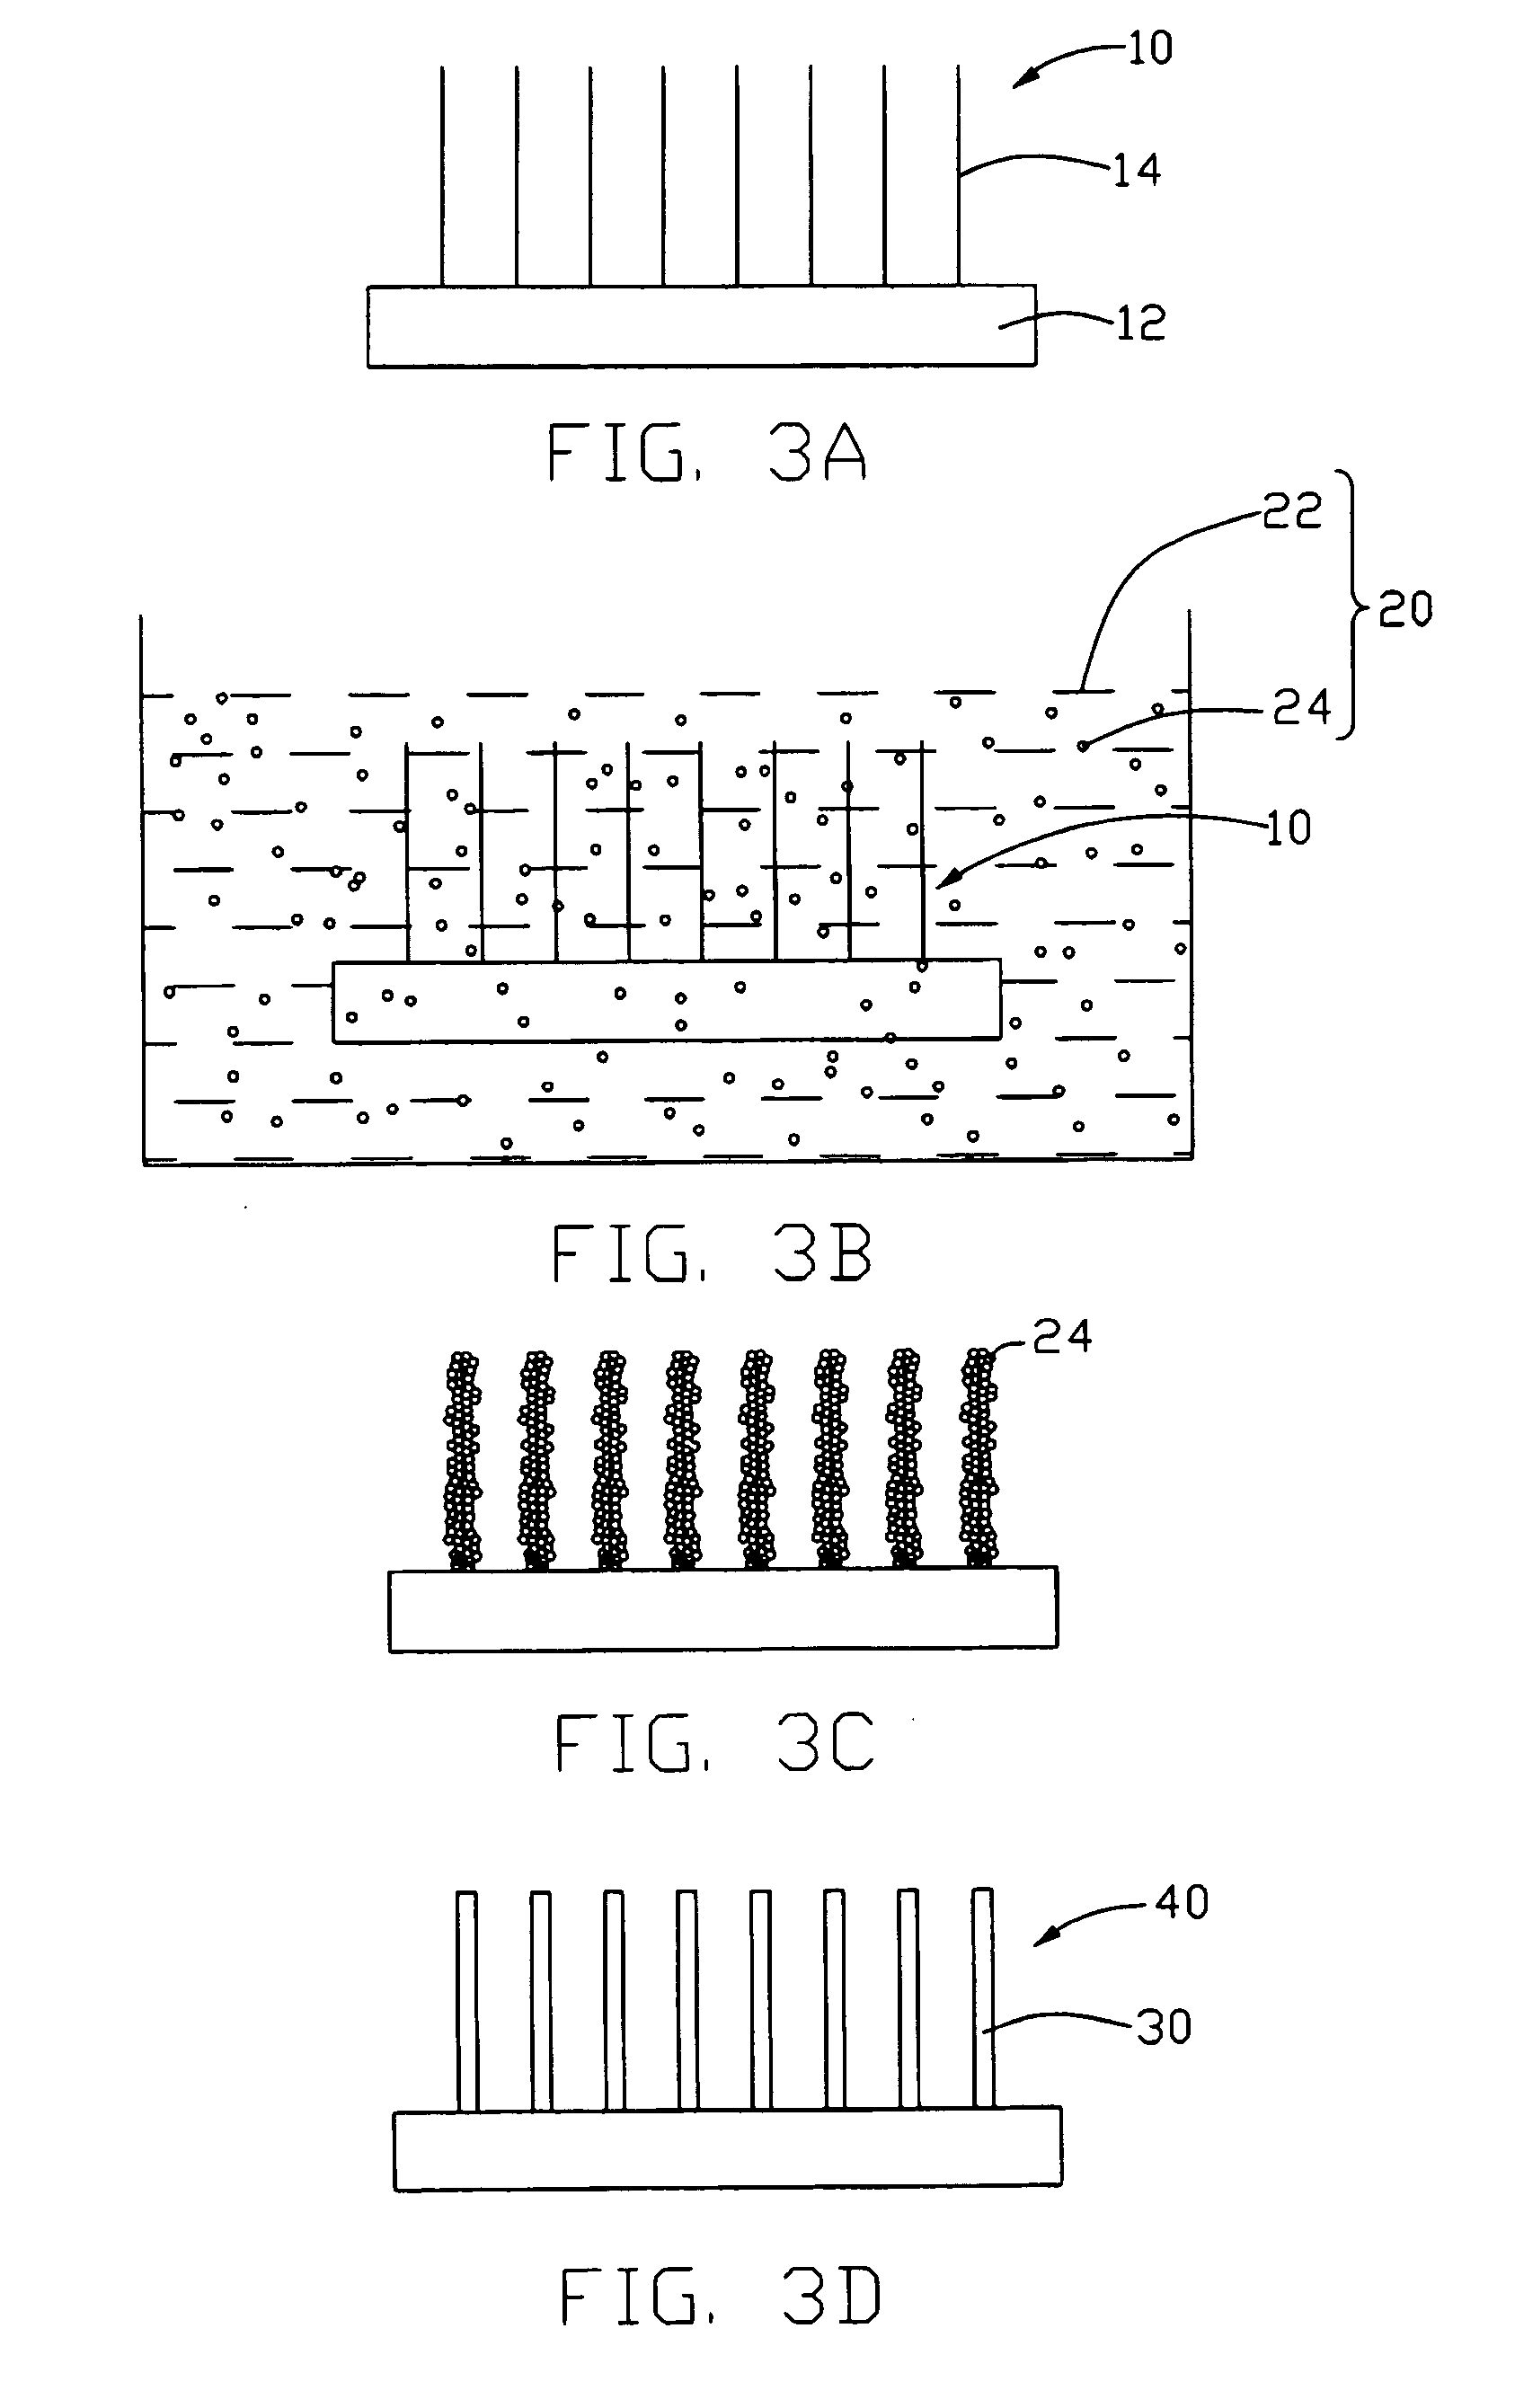 Metal nanowire array and method for fabricating the same